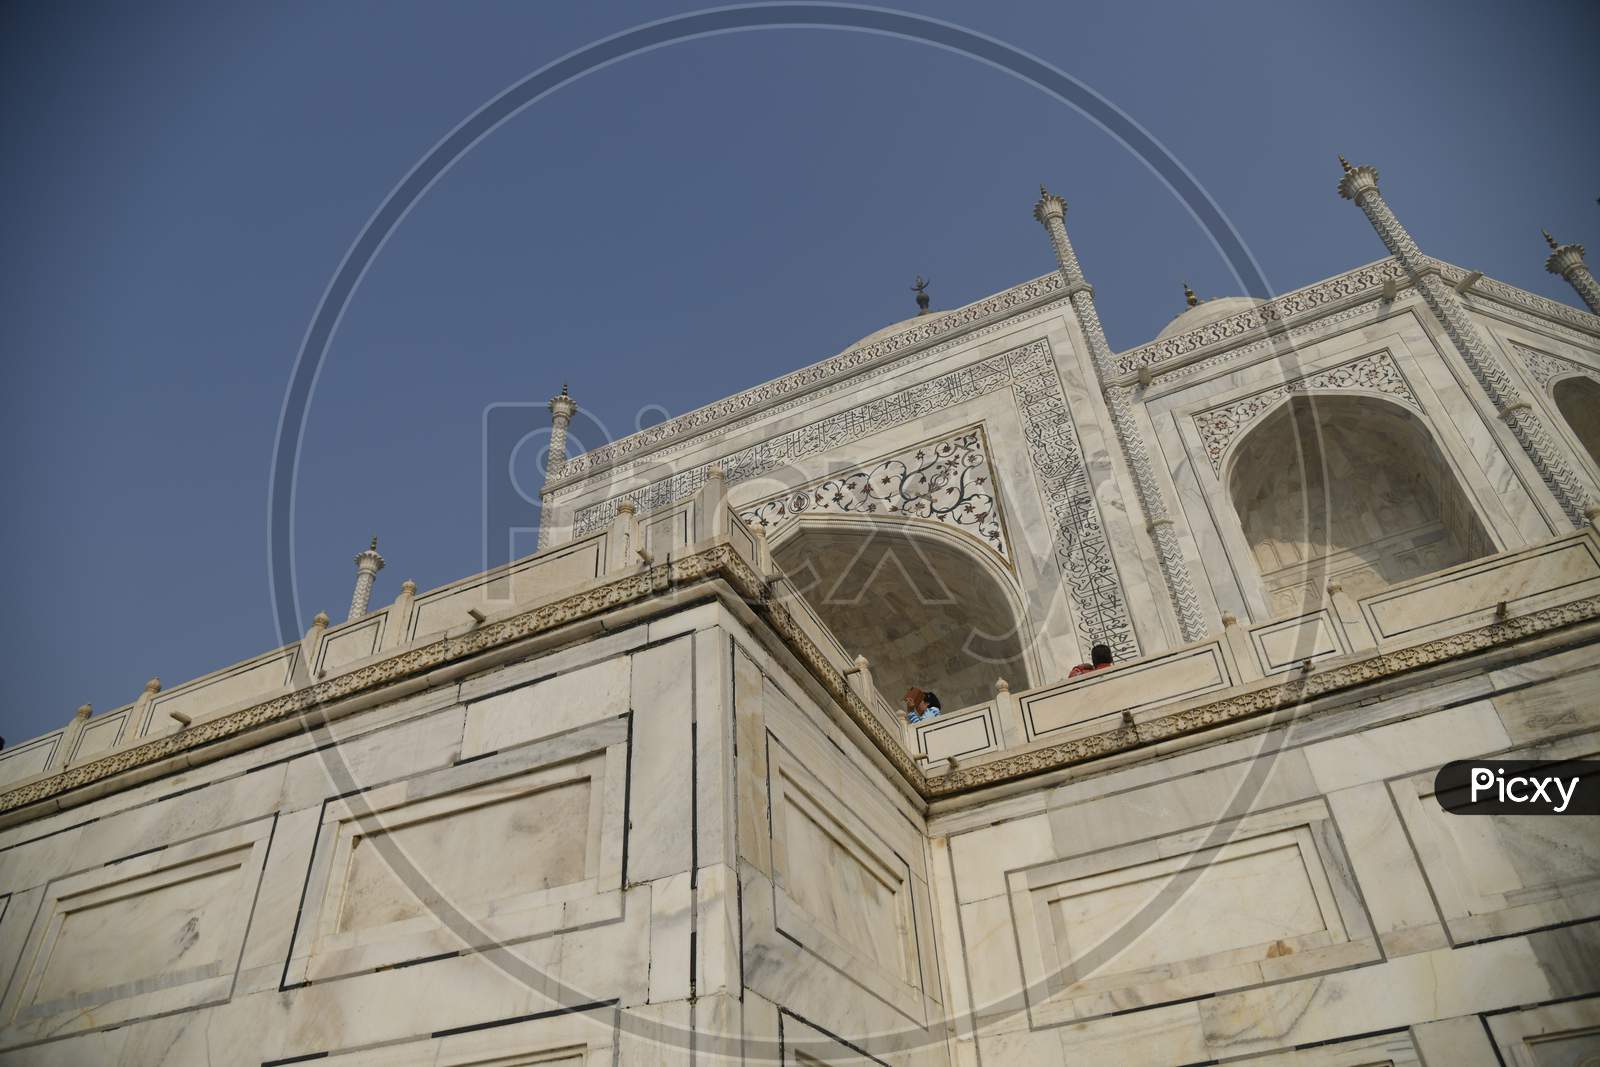 Architectural View Of Taj Mahal  With Walls Build With White marble Stone